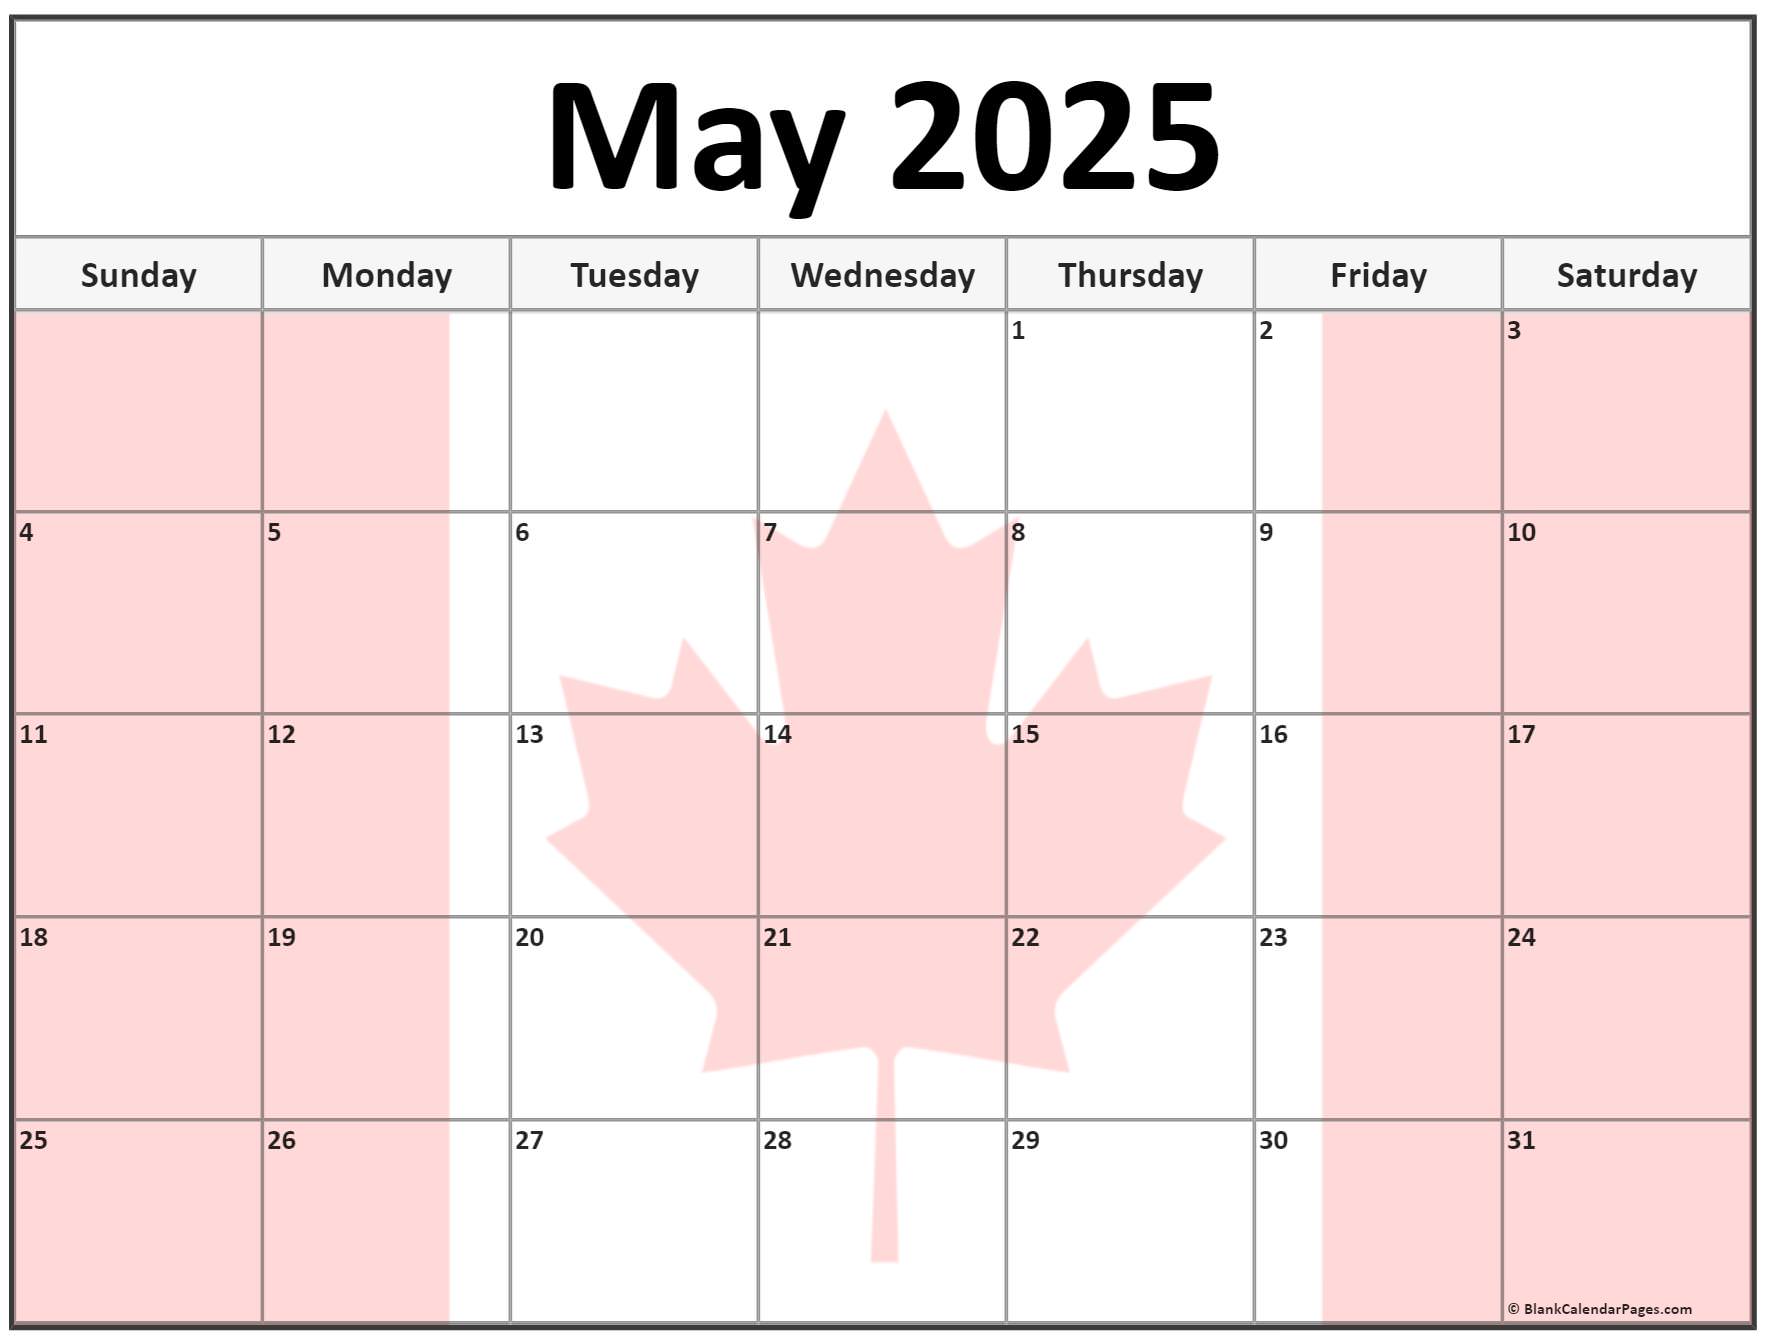 collection-of-may-2025-photo-calendars-with-image-filters